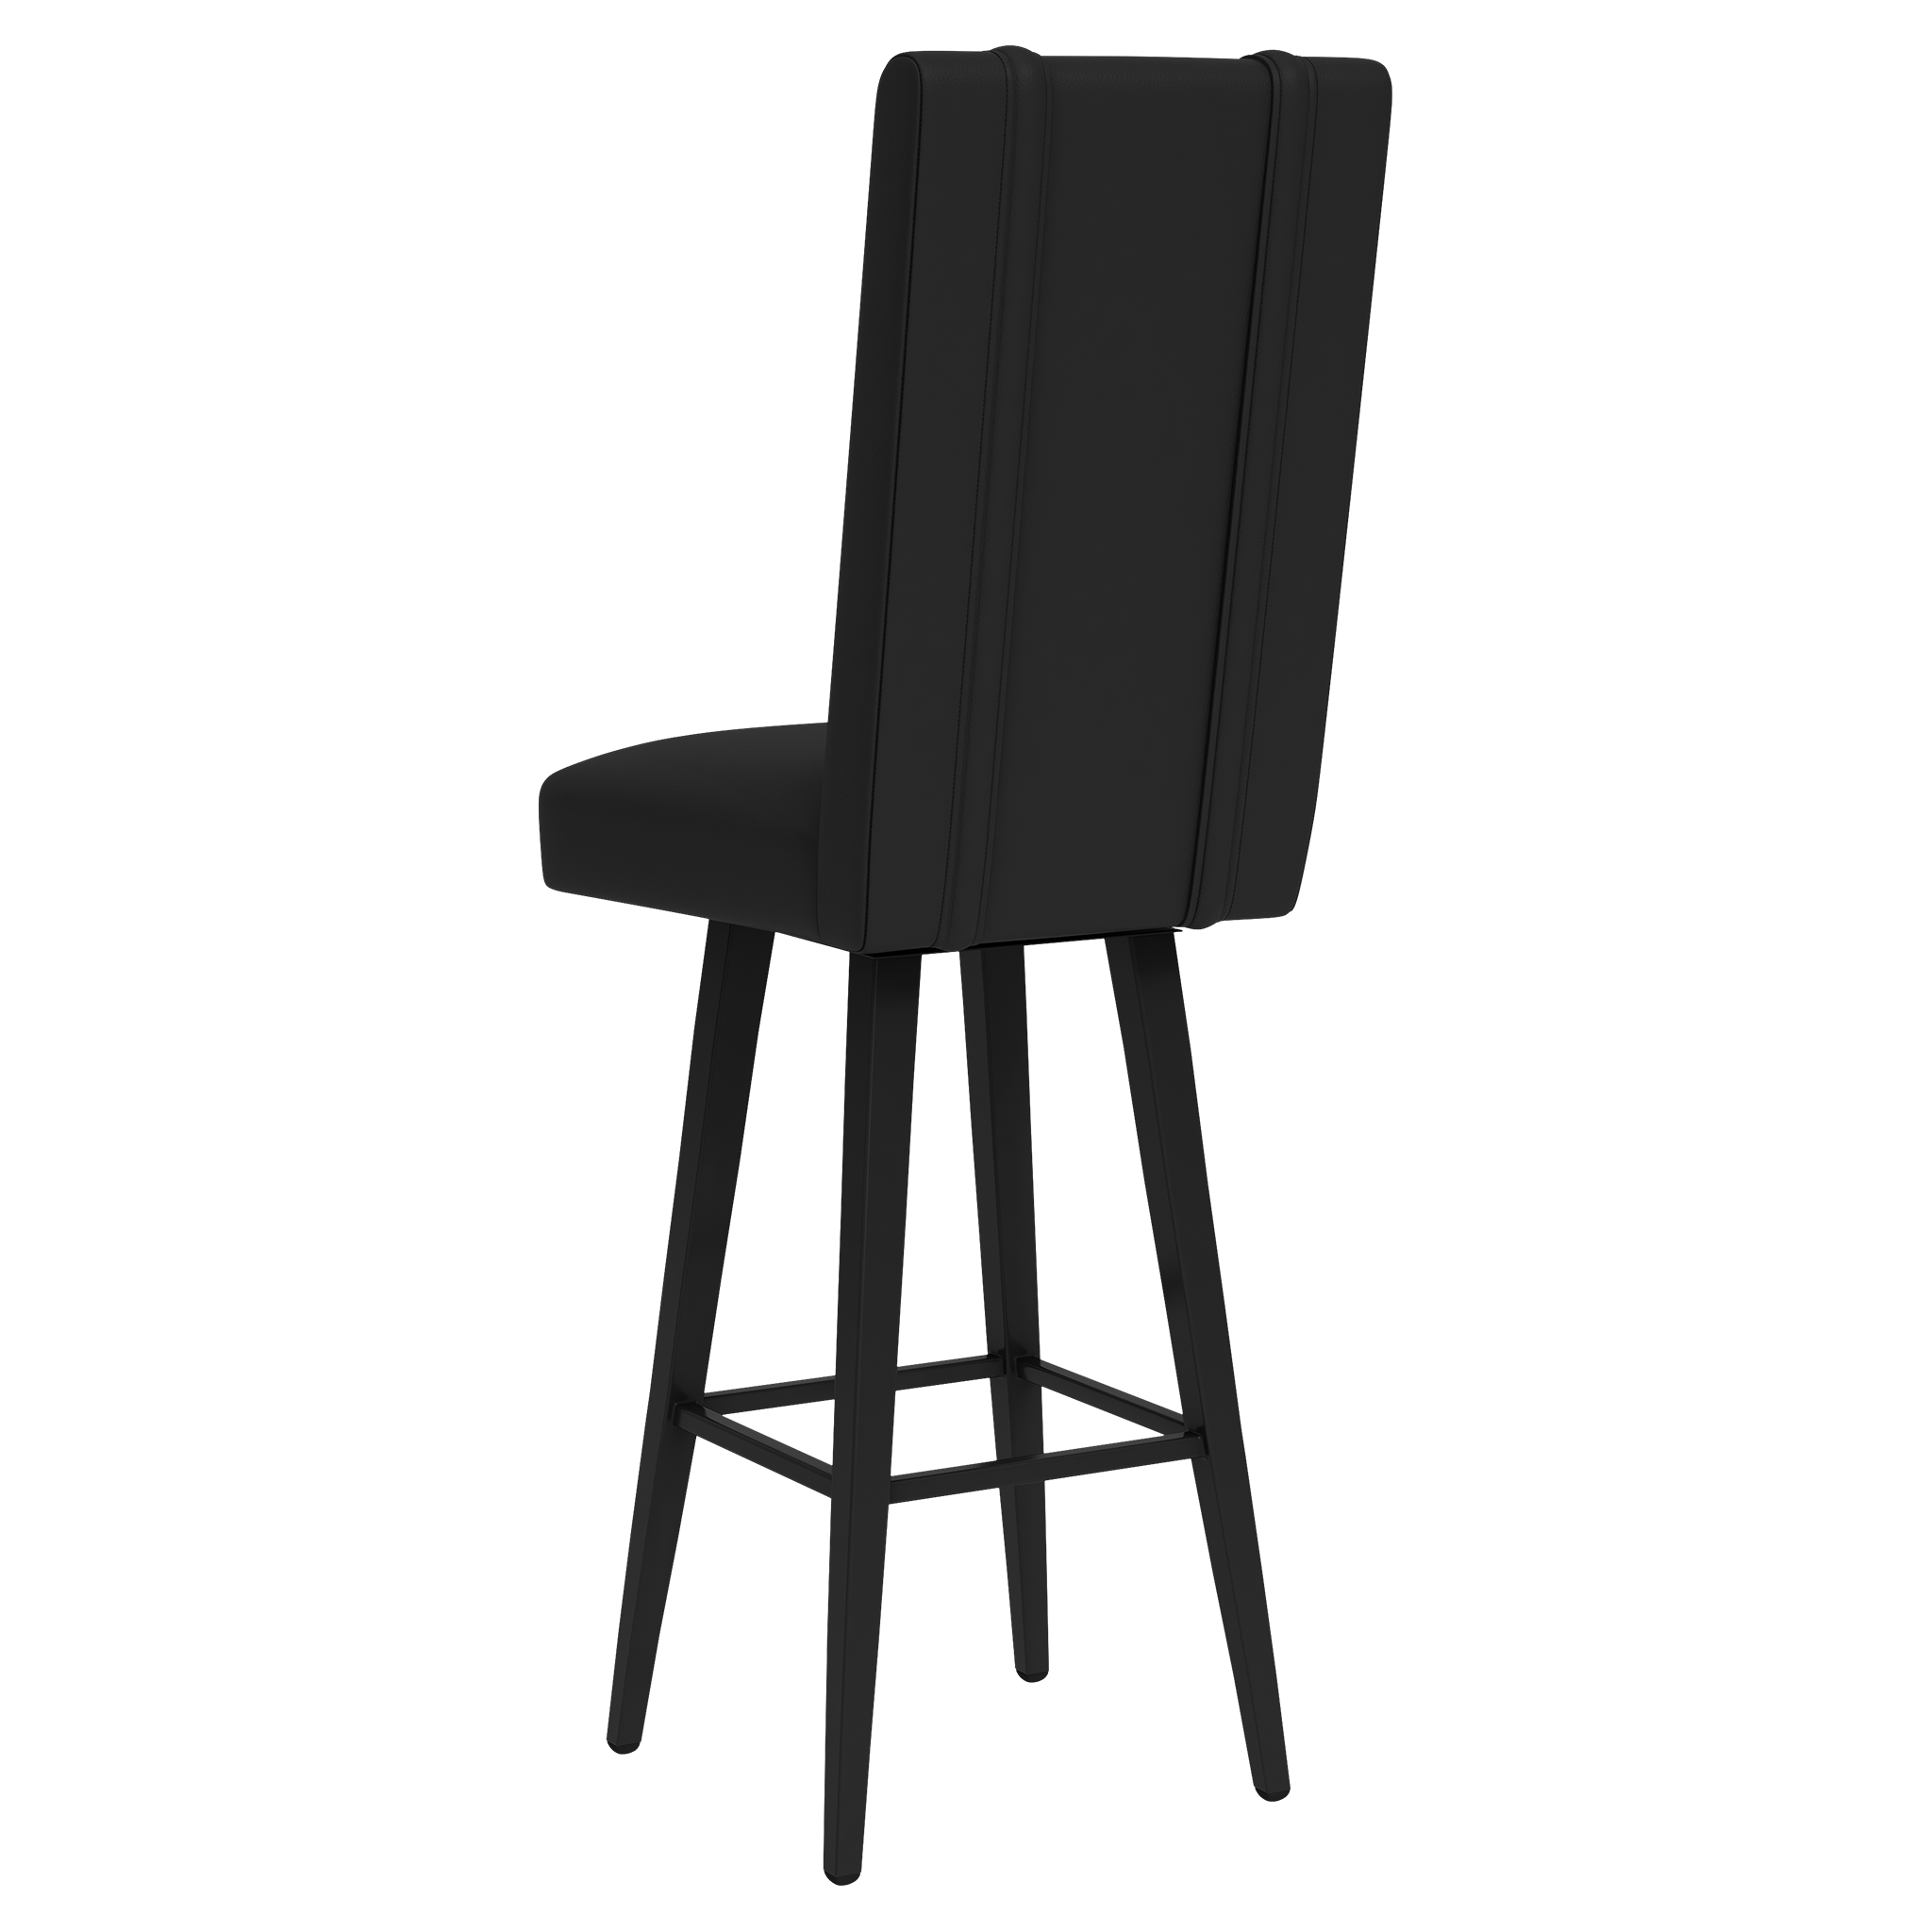 Swivel Bar Stool 2000 with New York Yankees Cooperstown